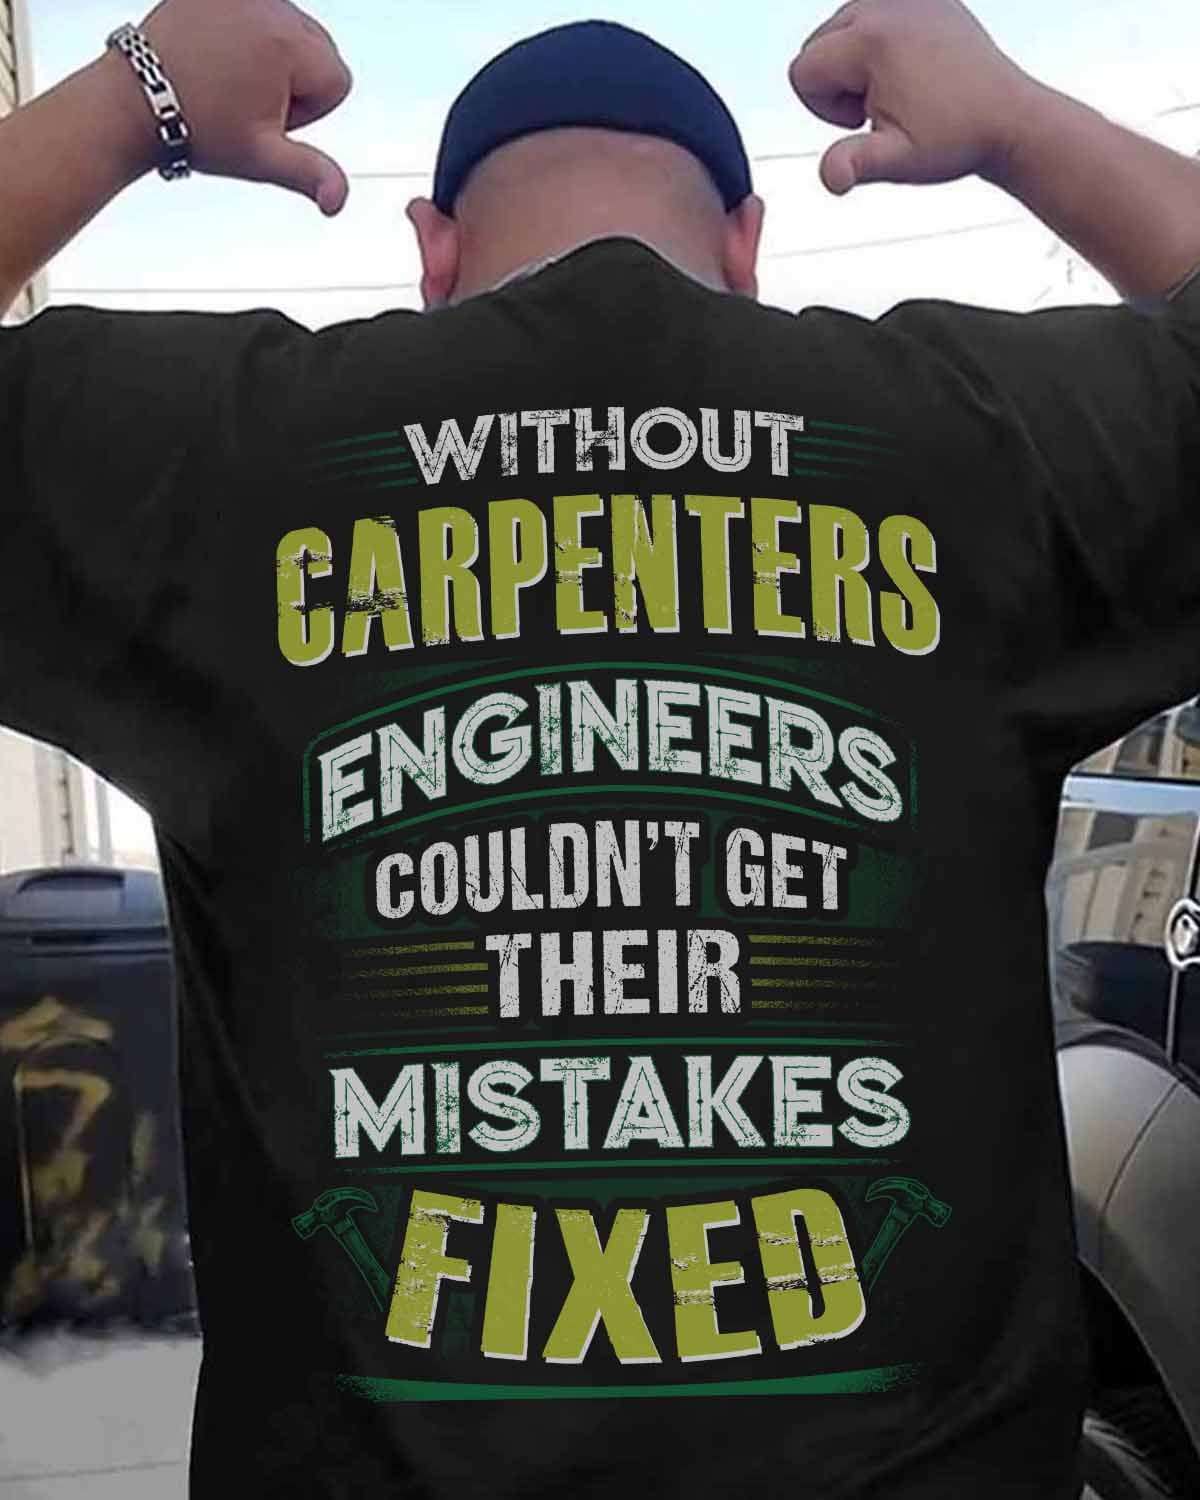 Without carpenters engineers couldn't get their mistakes fixed - Carpenter the job